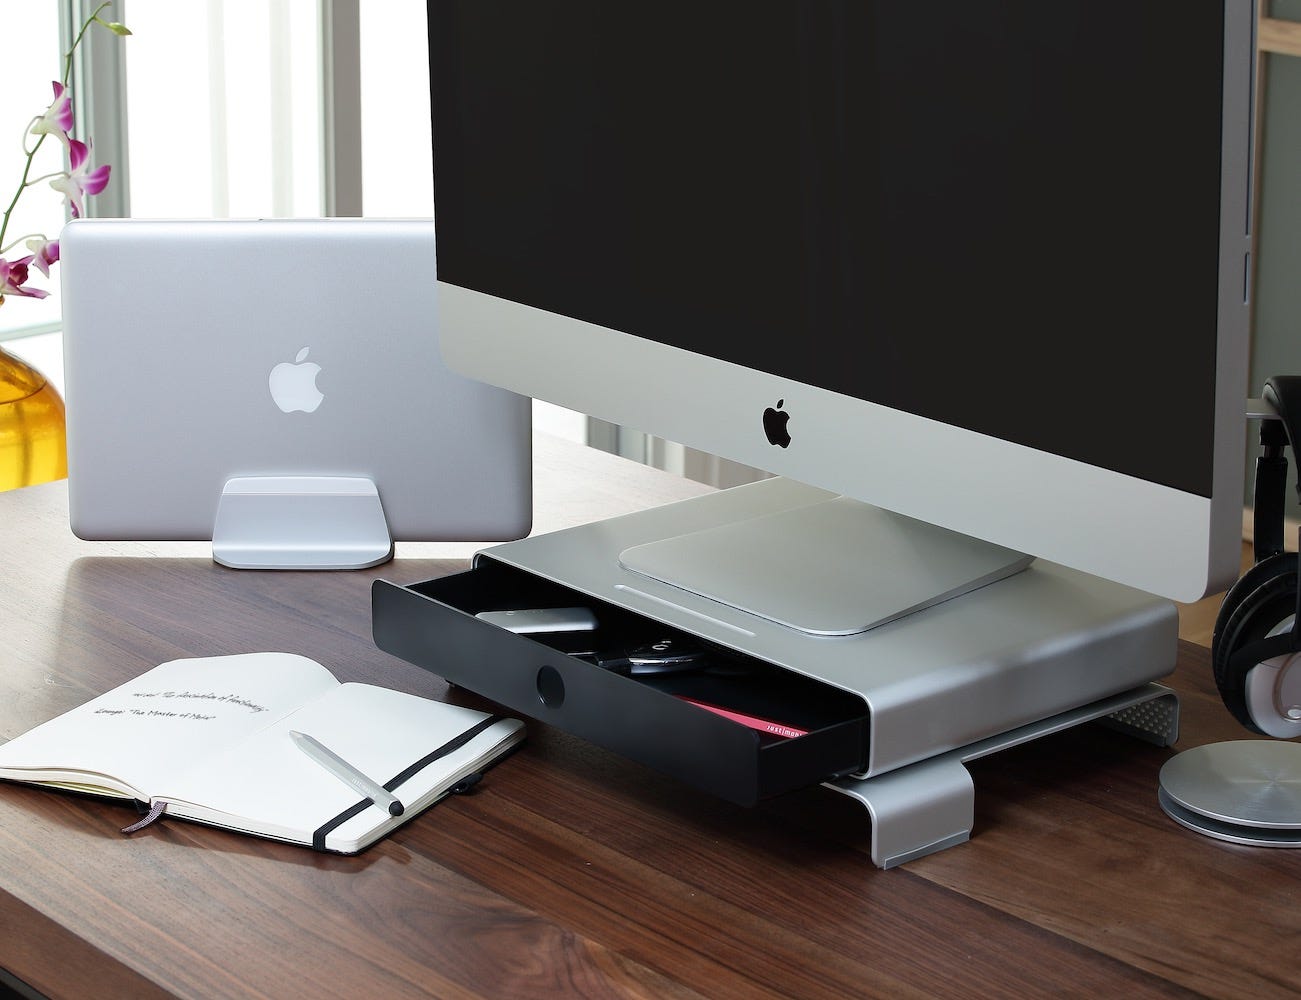 Top 10 desk accessories to enhance your daily work productivity in